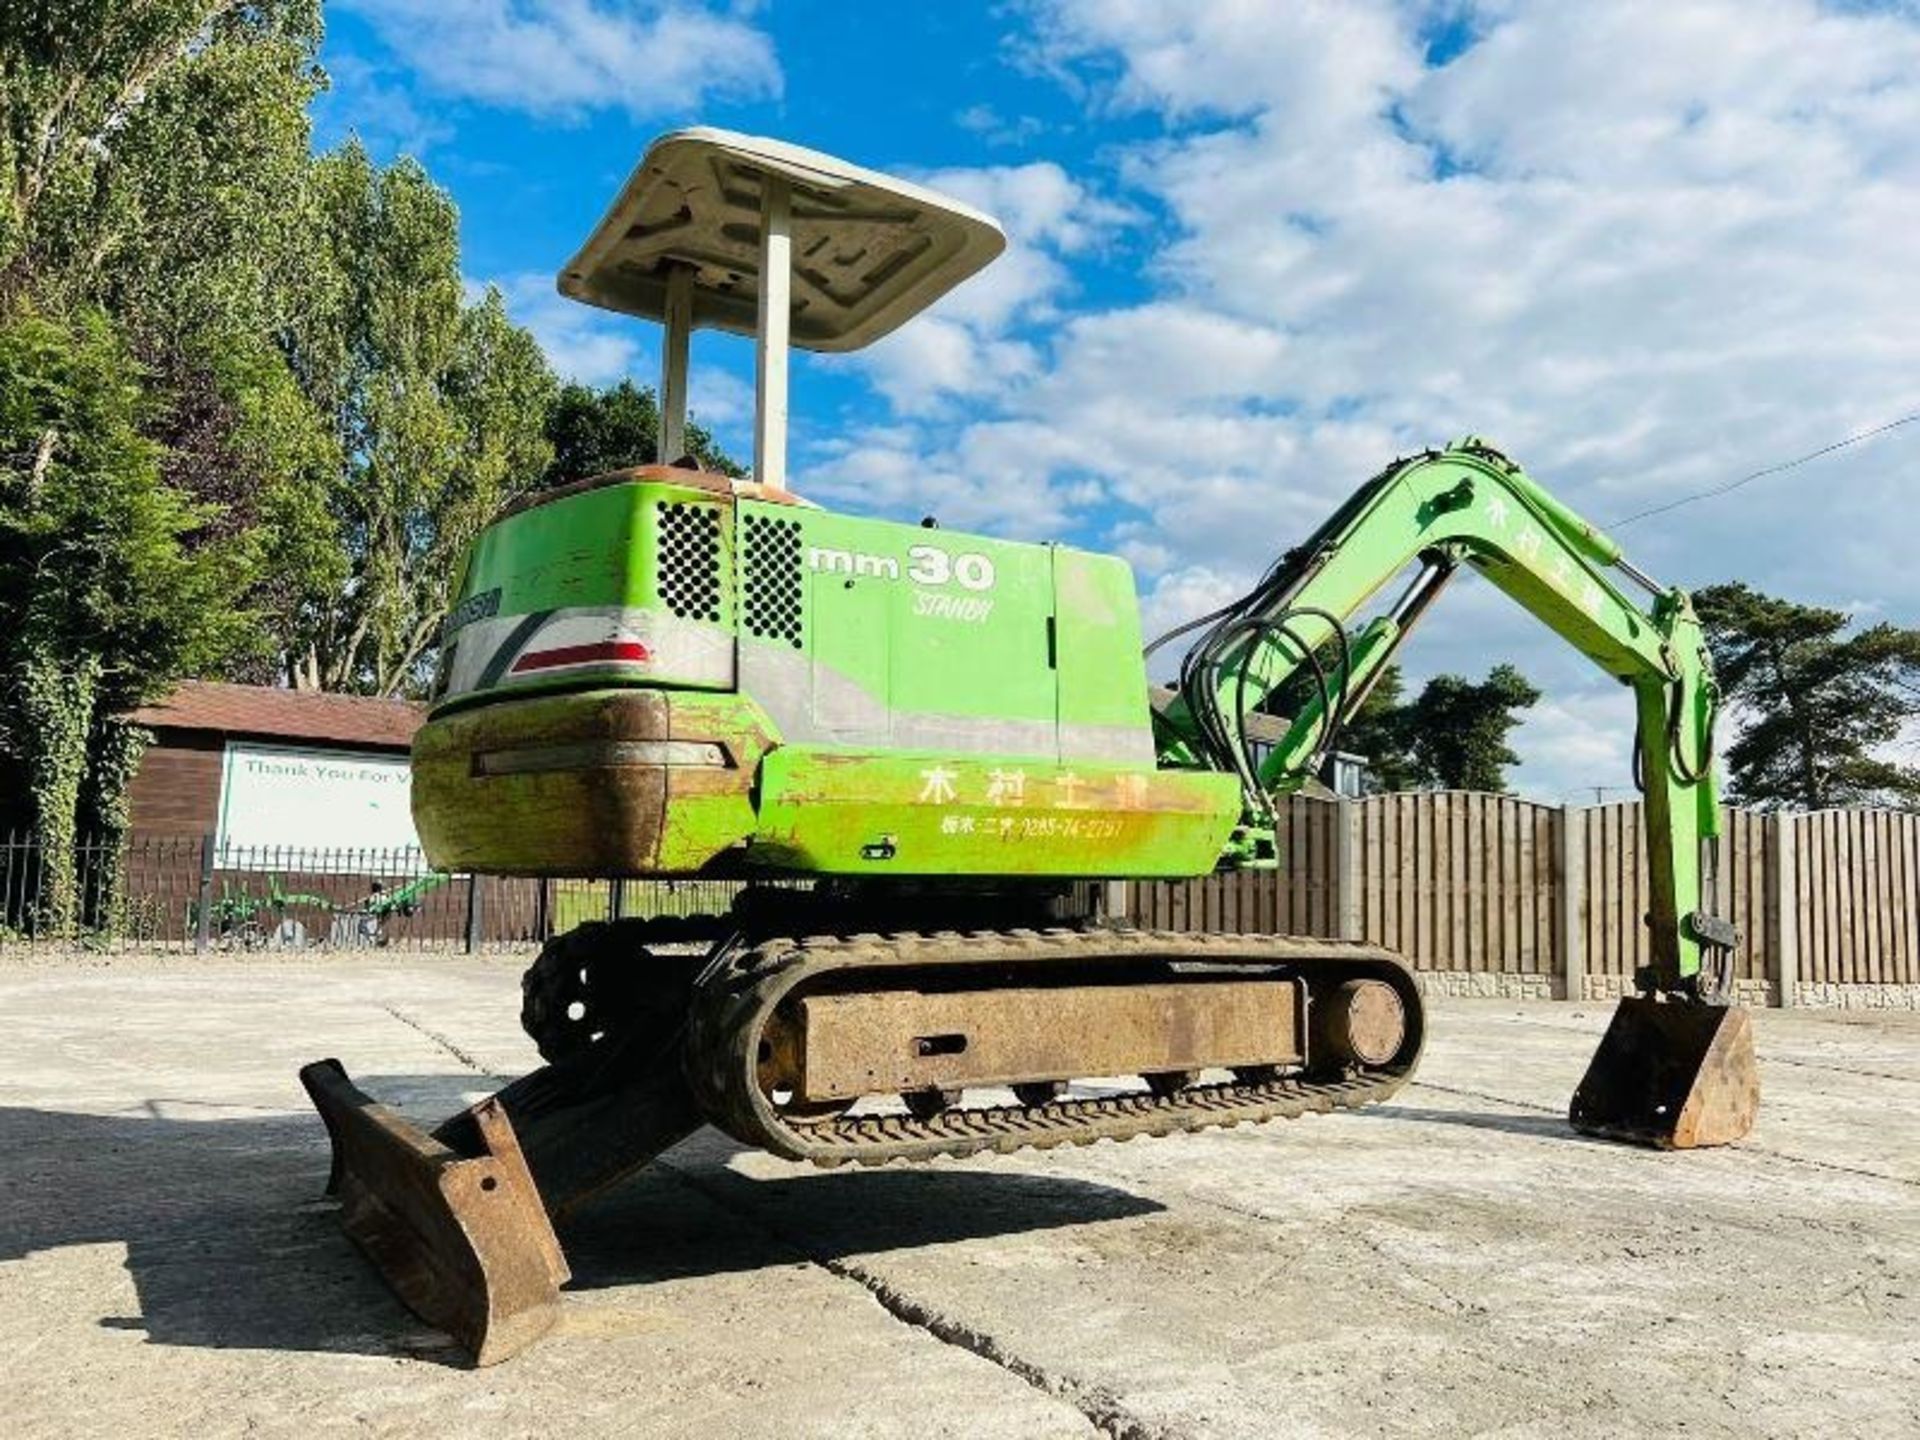 MITSUBISHI 30 TRACKED EXCAVATOR C/W RUBBER TRACKS , ROLE BAR AND CANOPY - Image 11 of 12